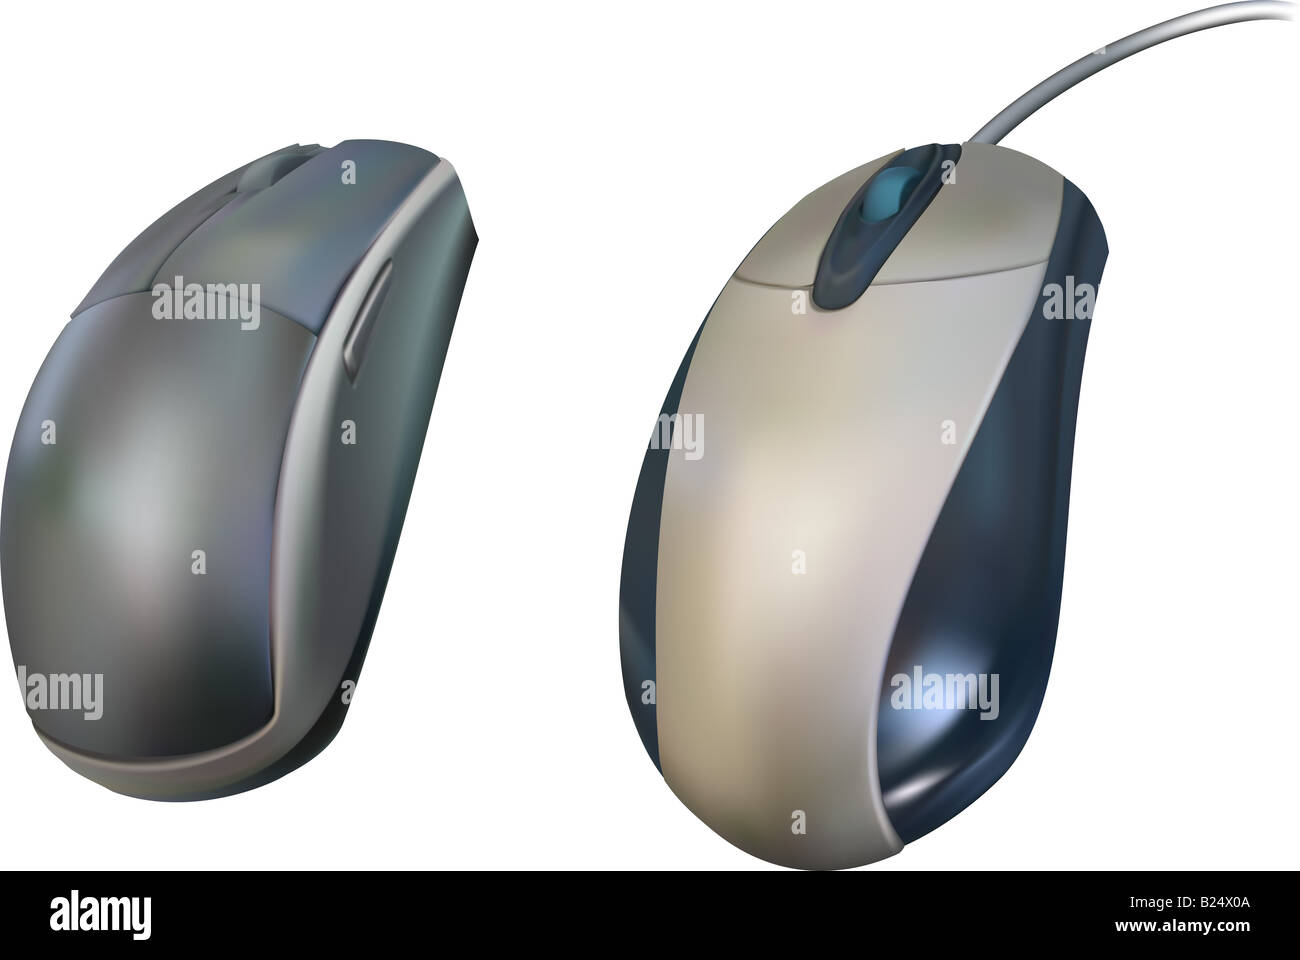 Computer Mouse. Illustrations of two computer mice Stock Photo